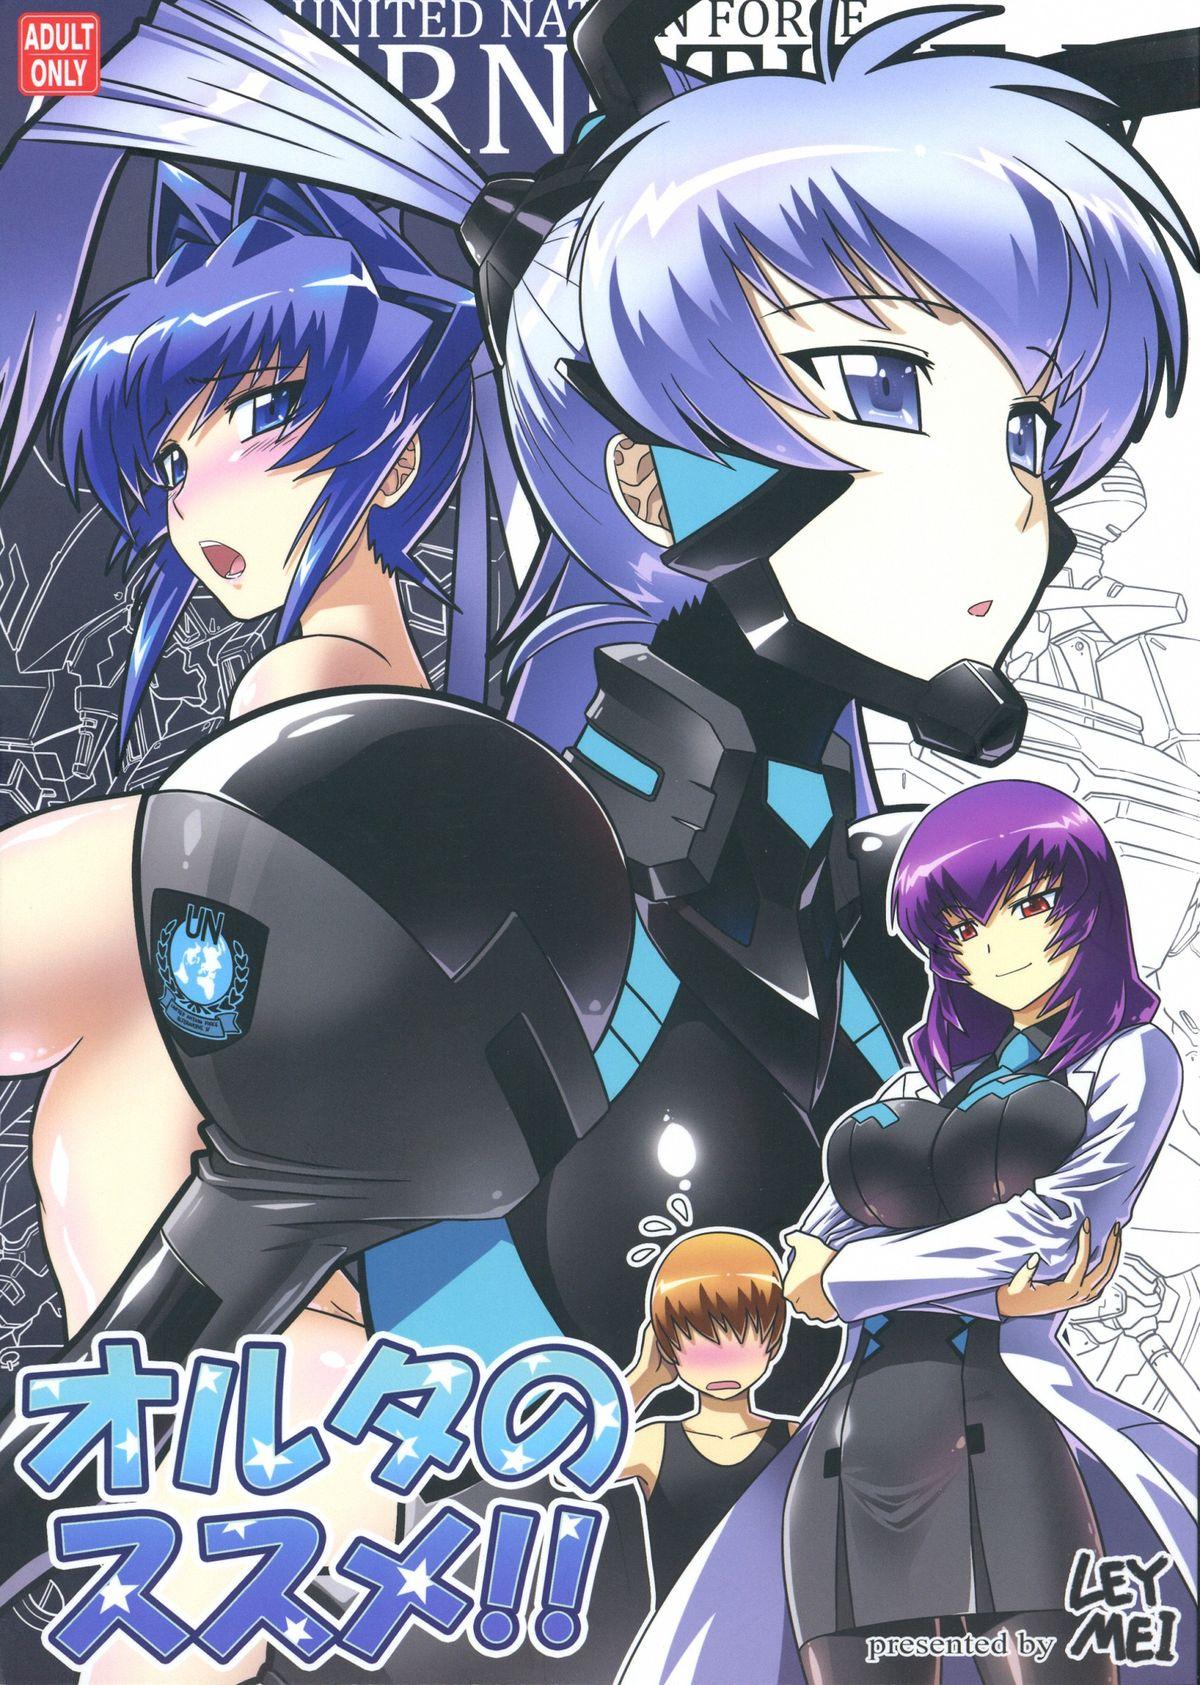 1080p Oruta no Susume!! - Muv luv Relax - Page 1